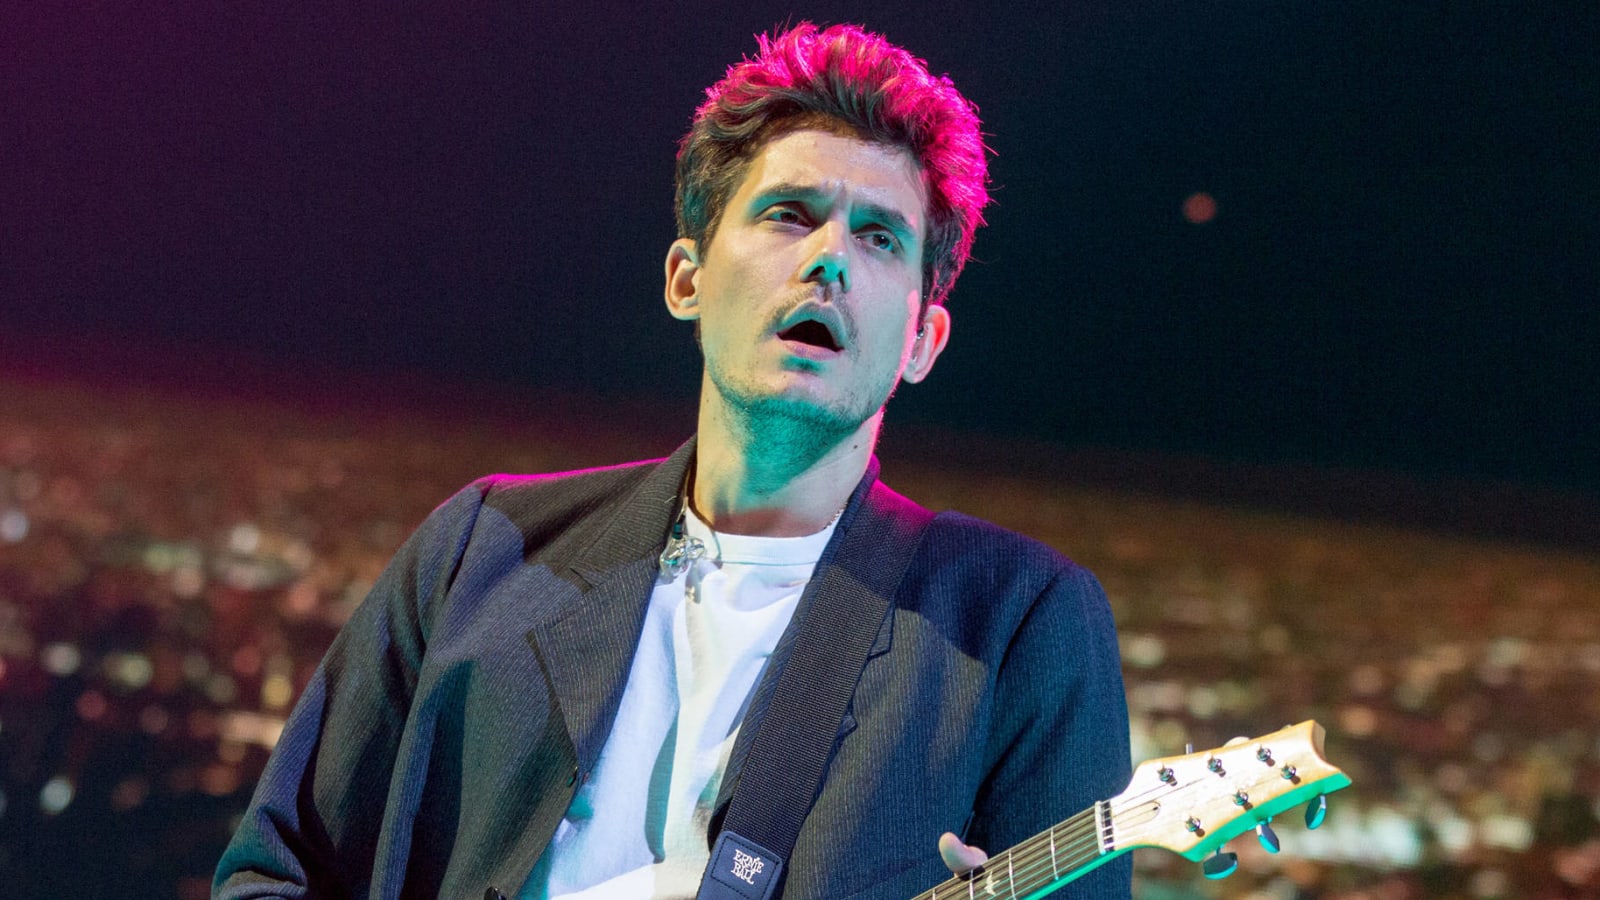 John Mayer gives thoughtful response to fan who asks if he's still a 'recovering ego addict'